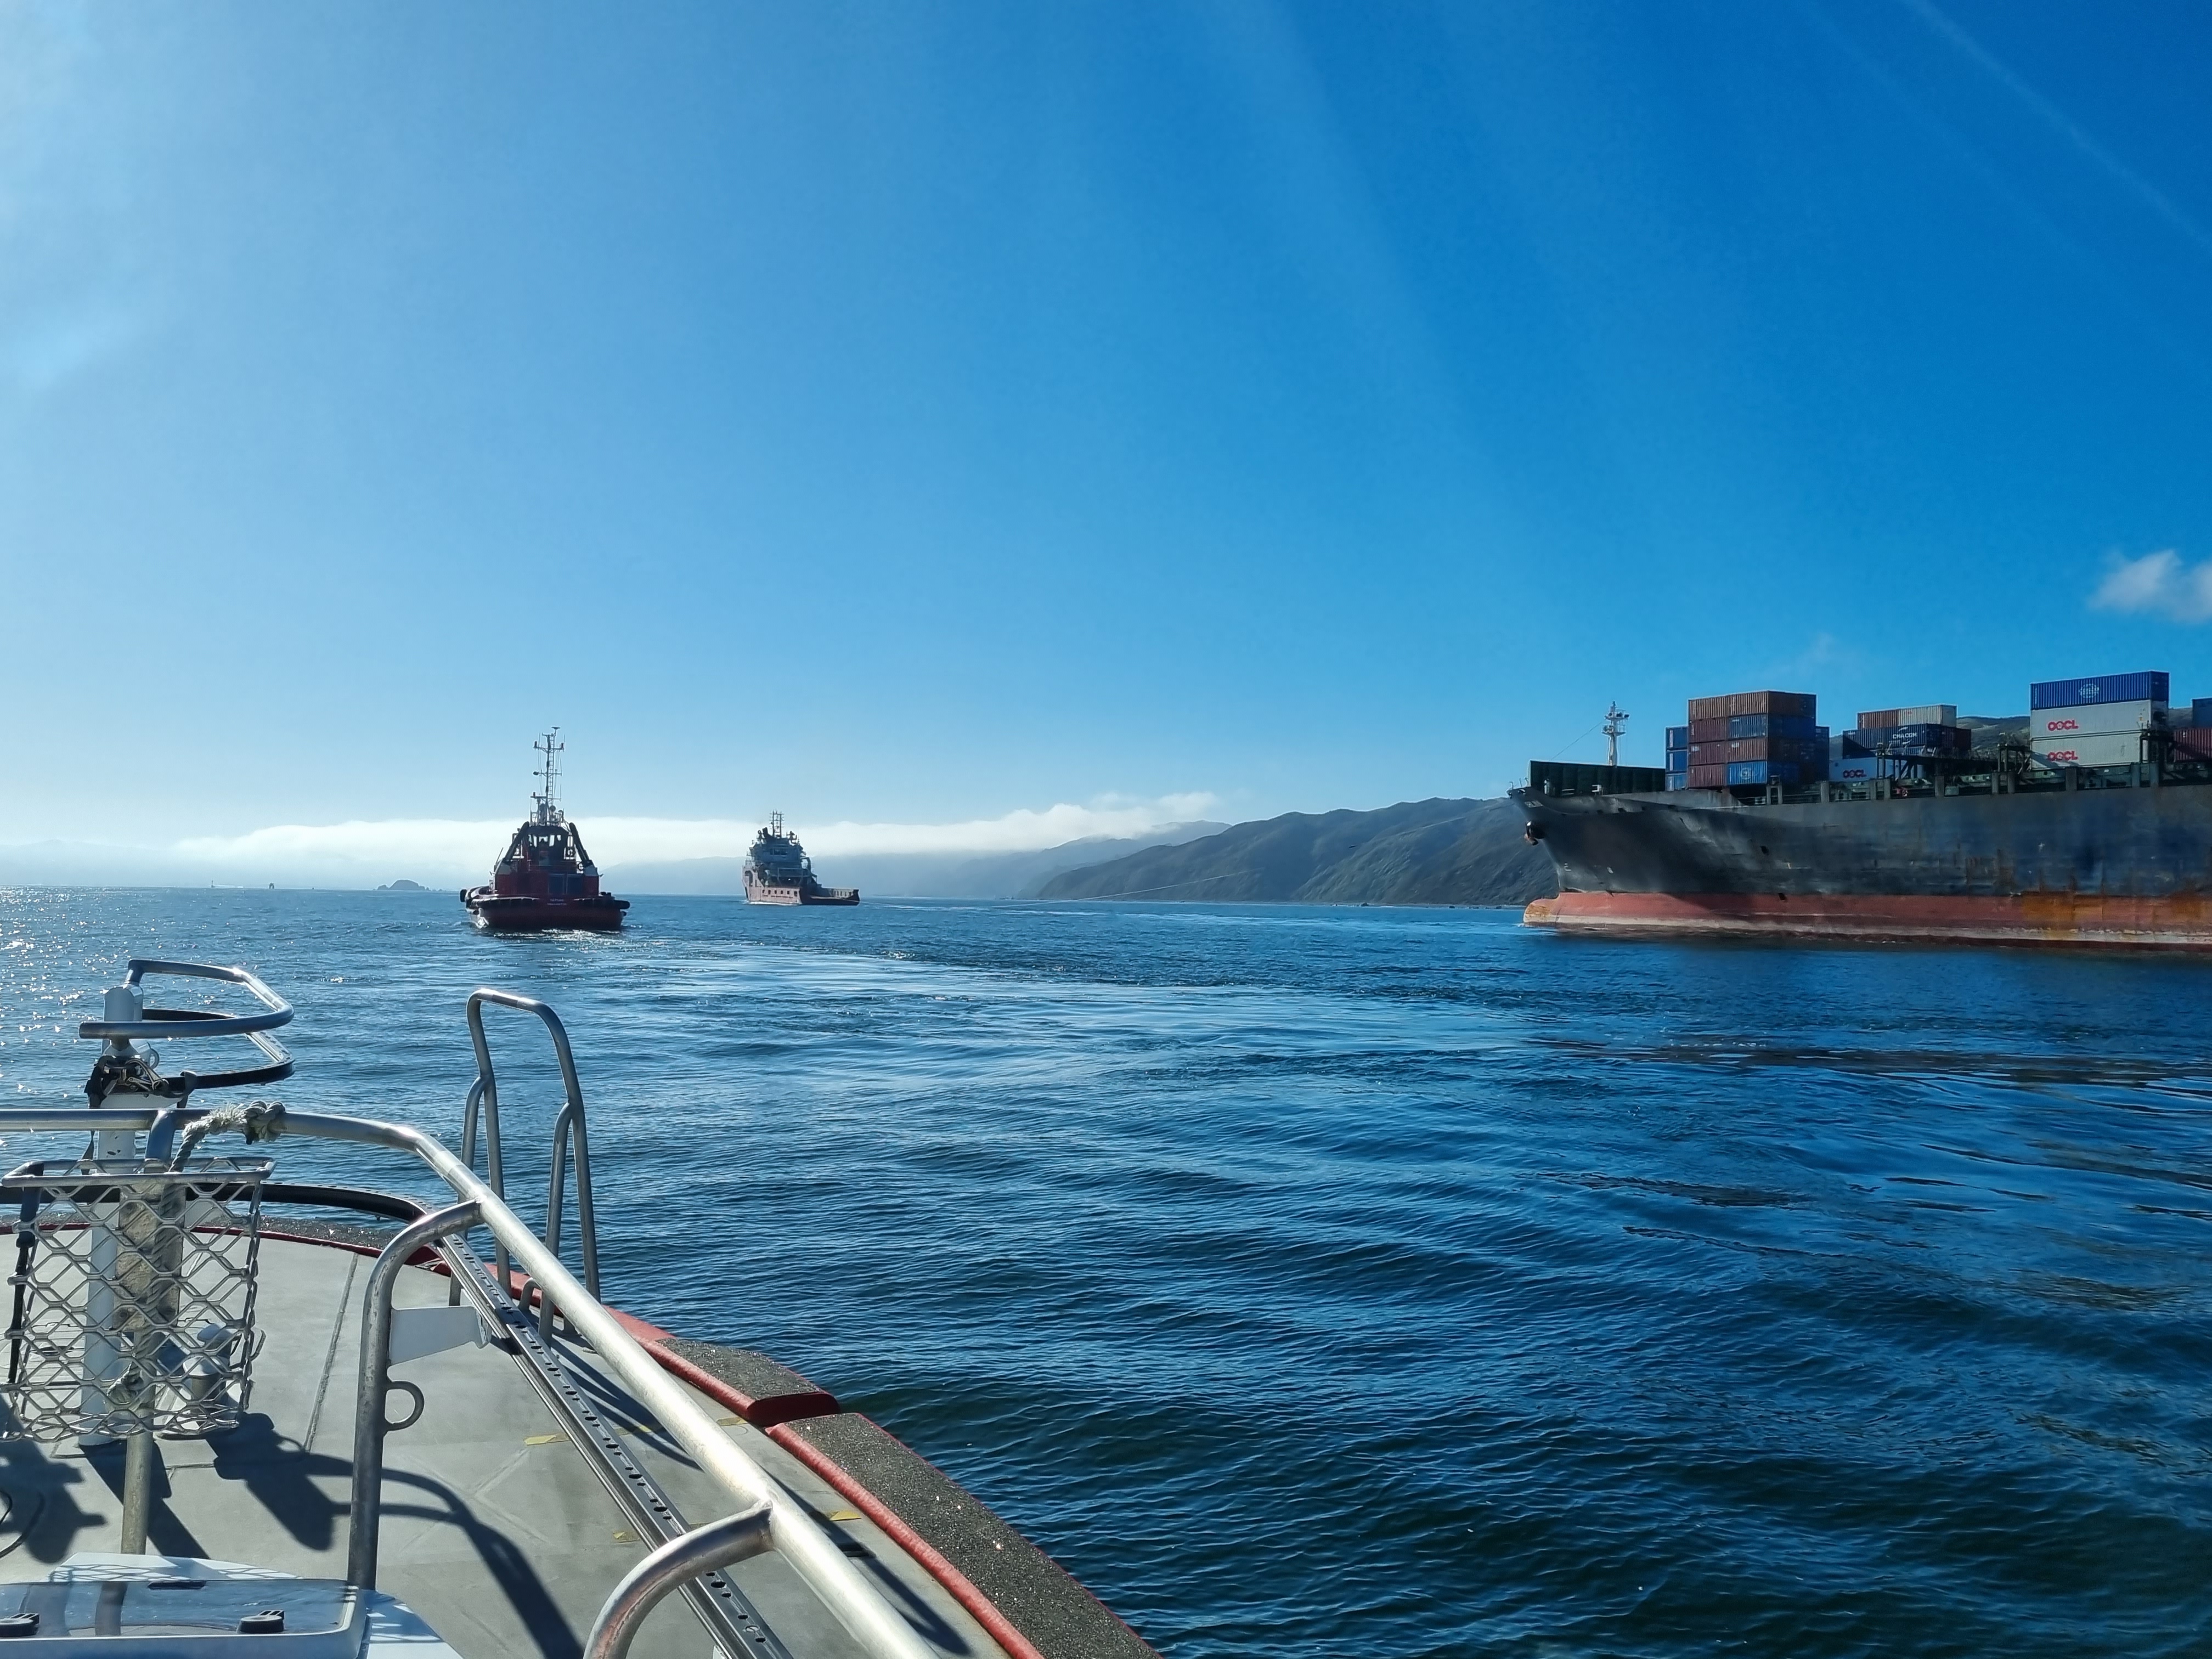 The Skandi Emerald tows Shiling with Tug Tapuhi providing support